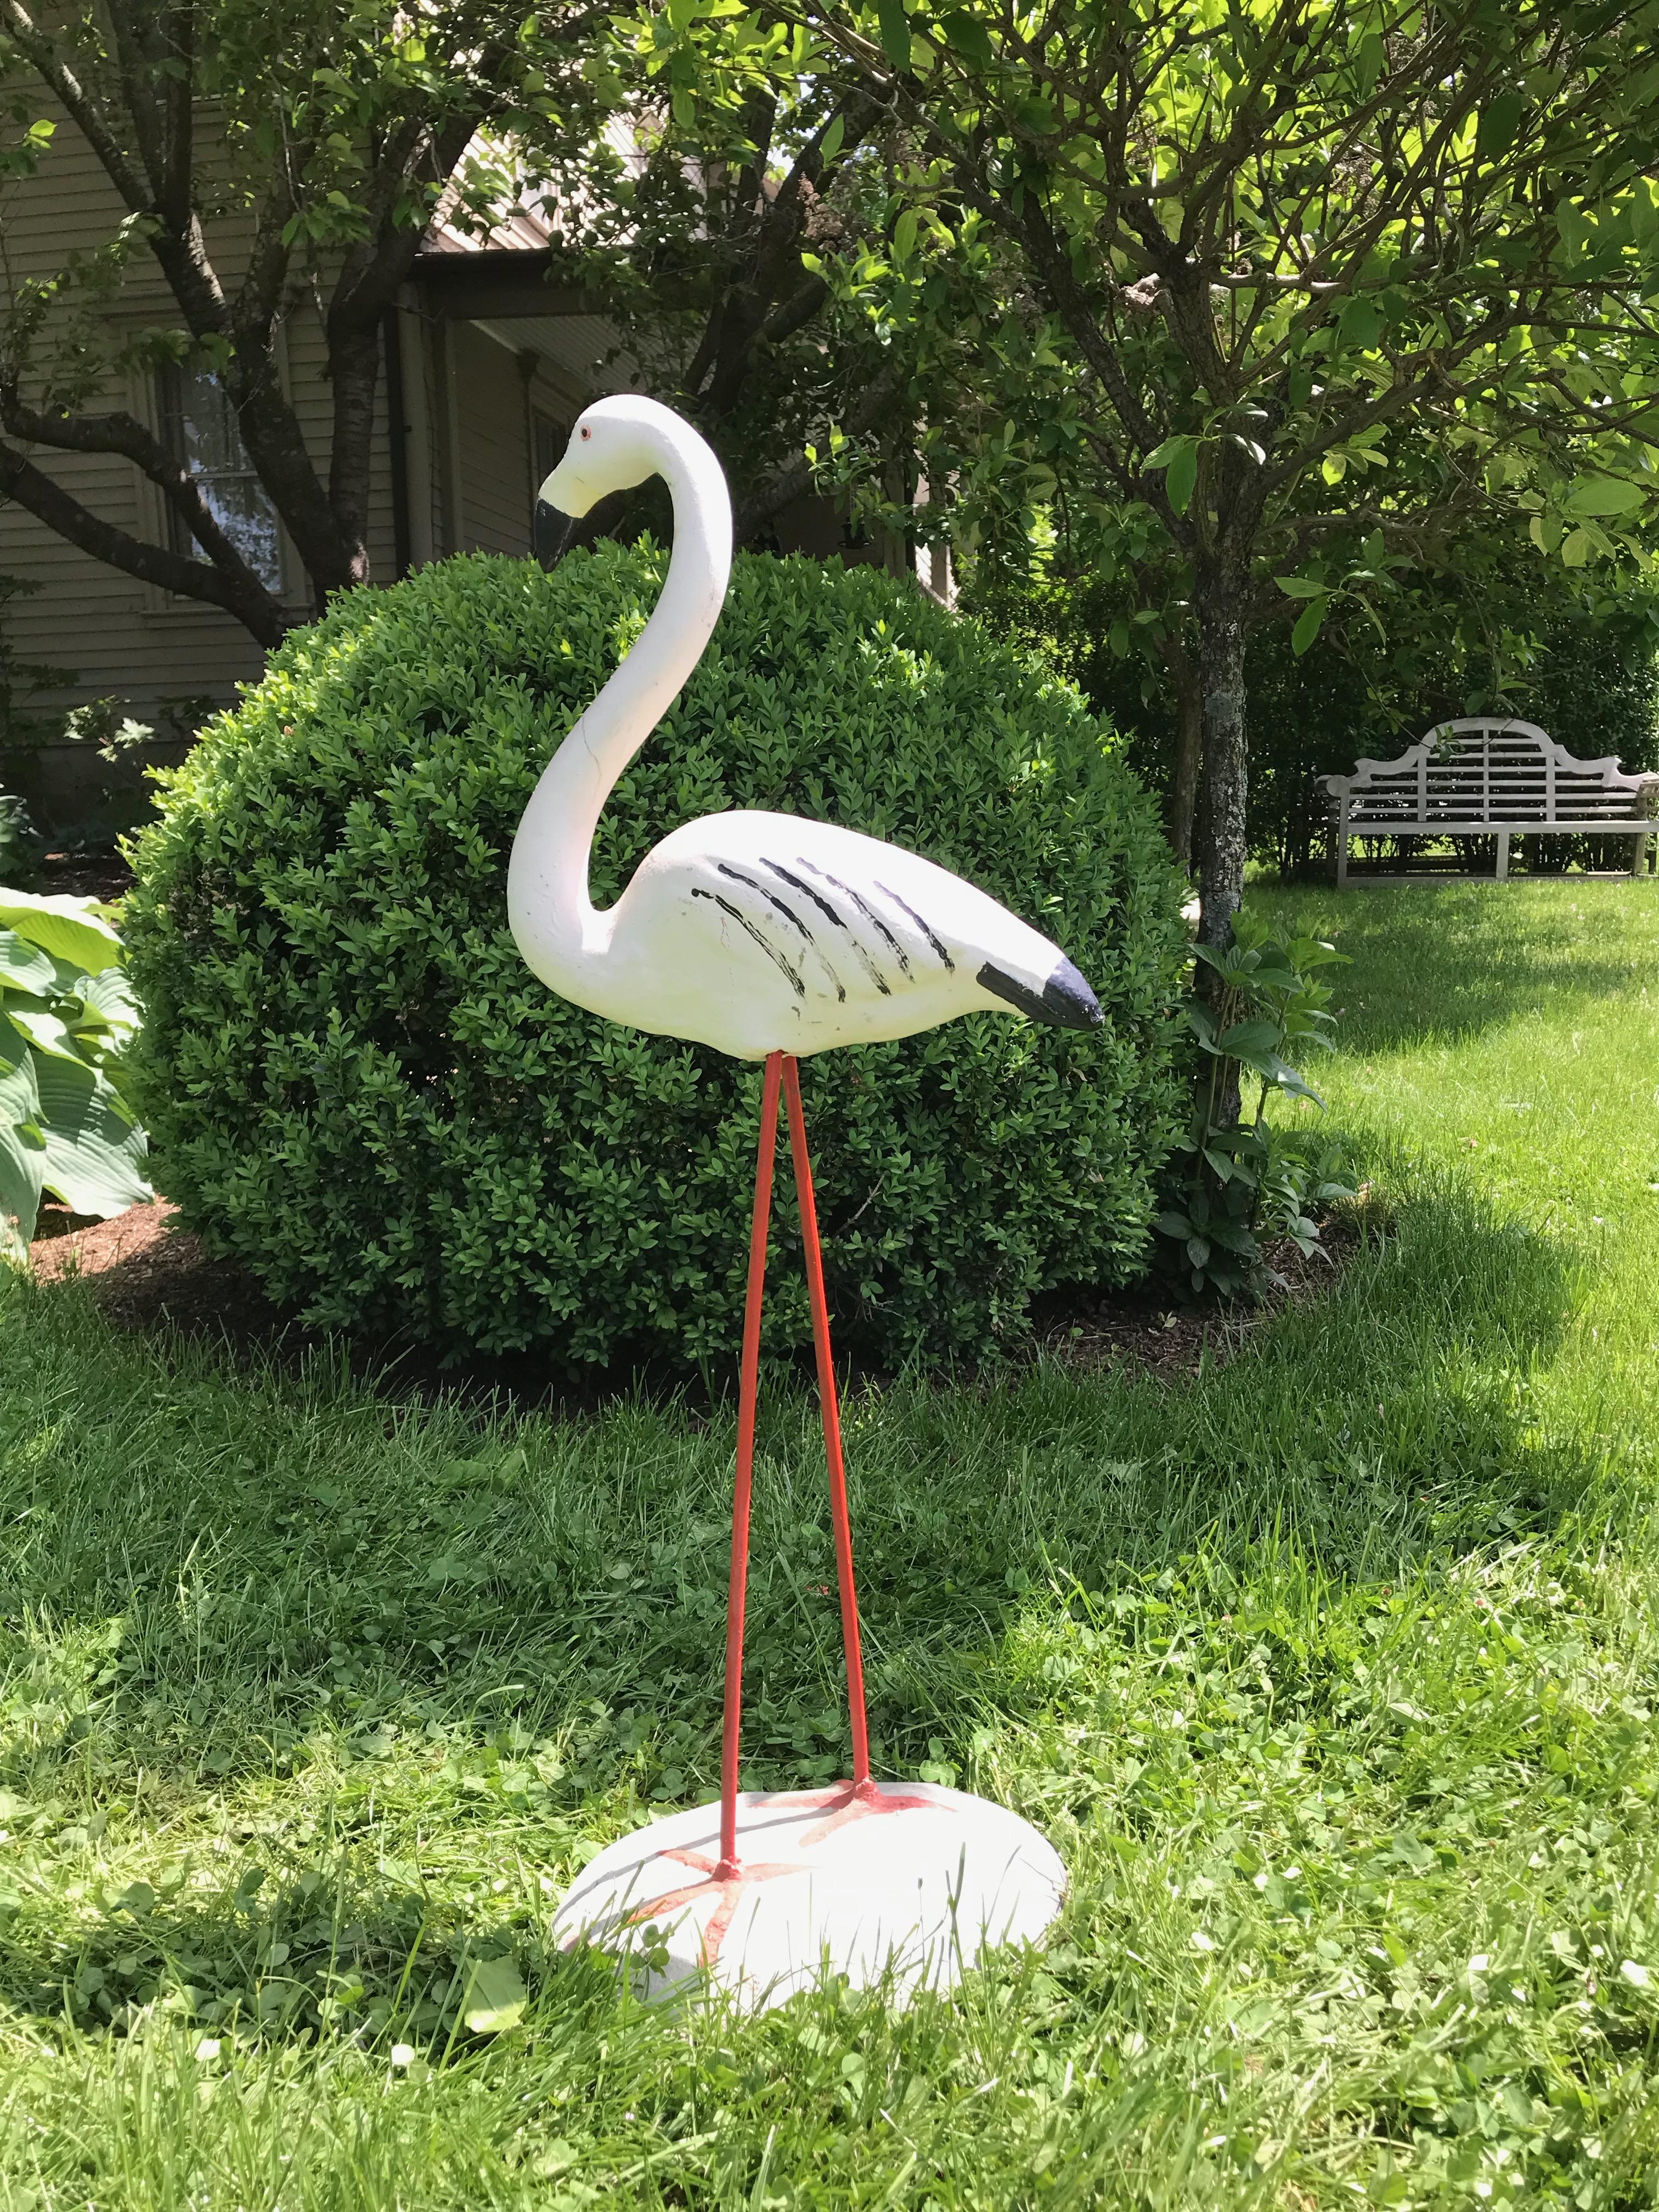 We jumped at the chance to buy this grouping of four French flamingos and a heron (shown in the last two photos), and this is the white flamingo. Made of cast stone with iron legs, and very solid, he cuts a dashing figure, in spite of the recent,